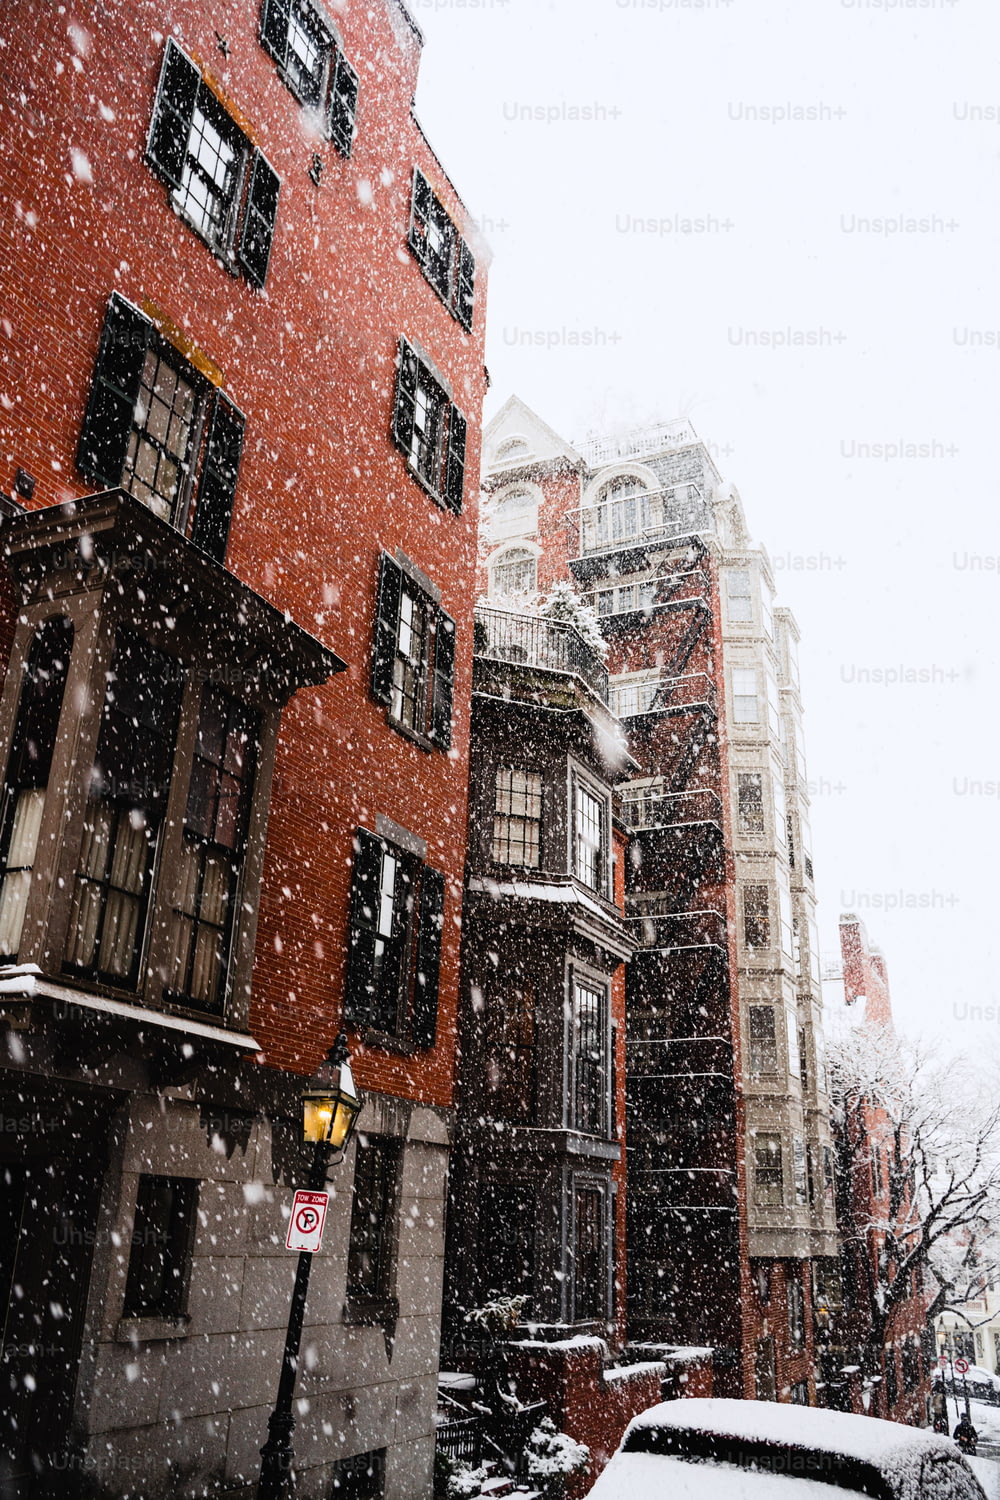 a snowy day in a city with buildings and cars